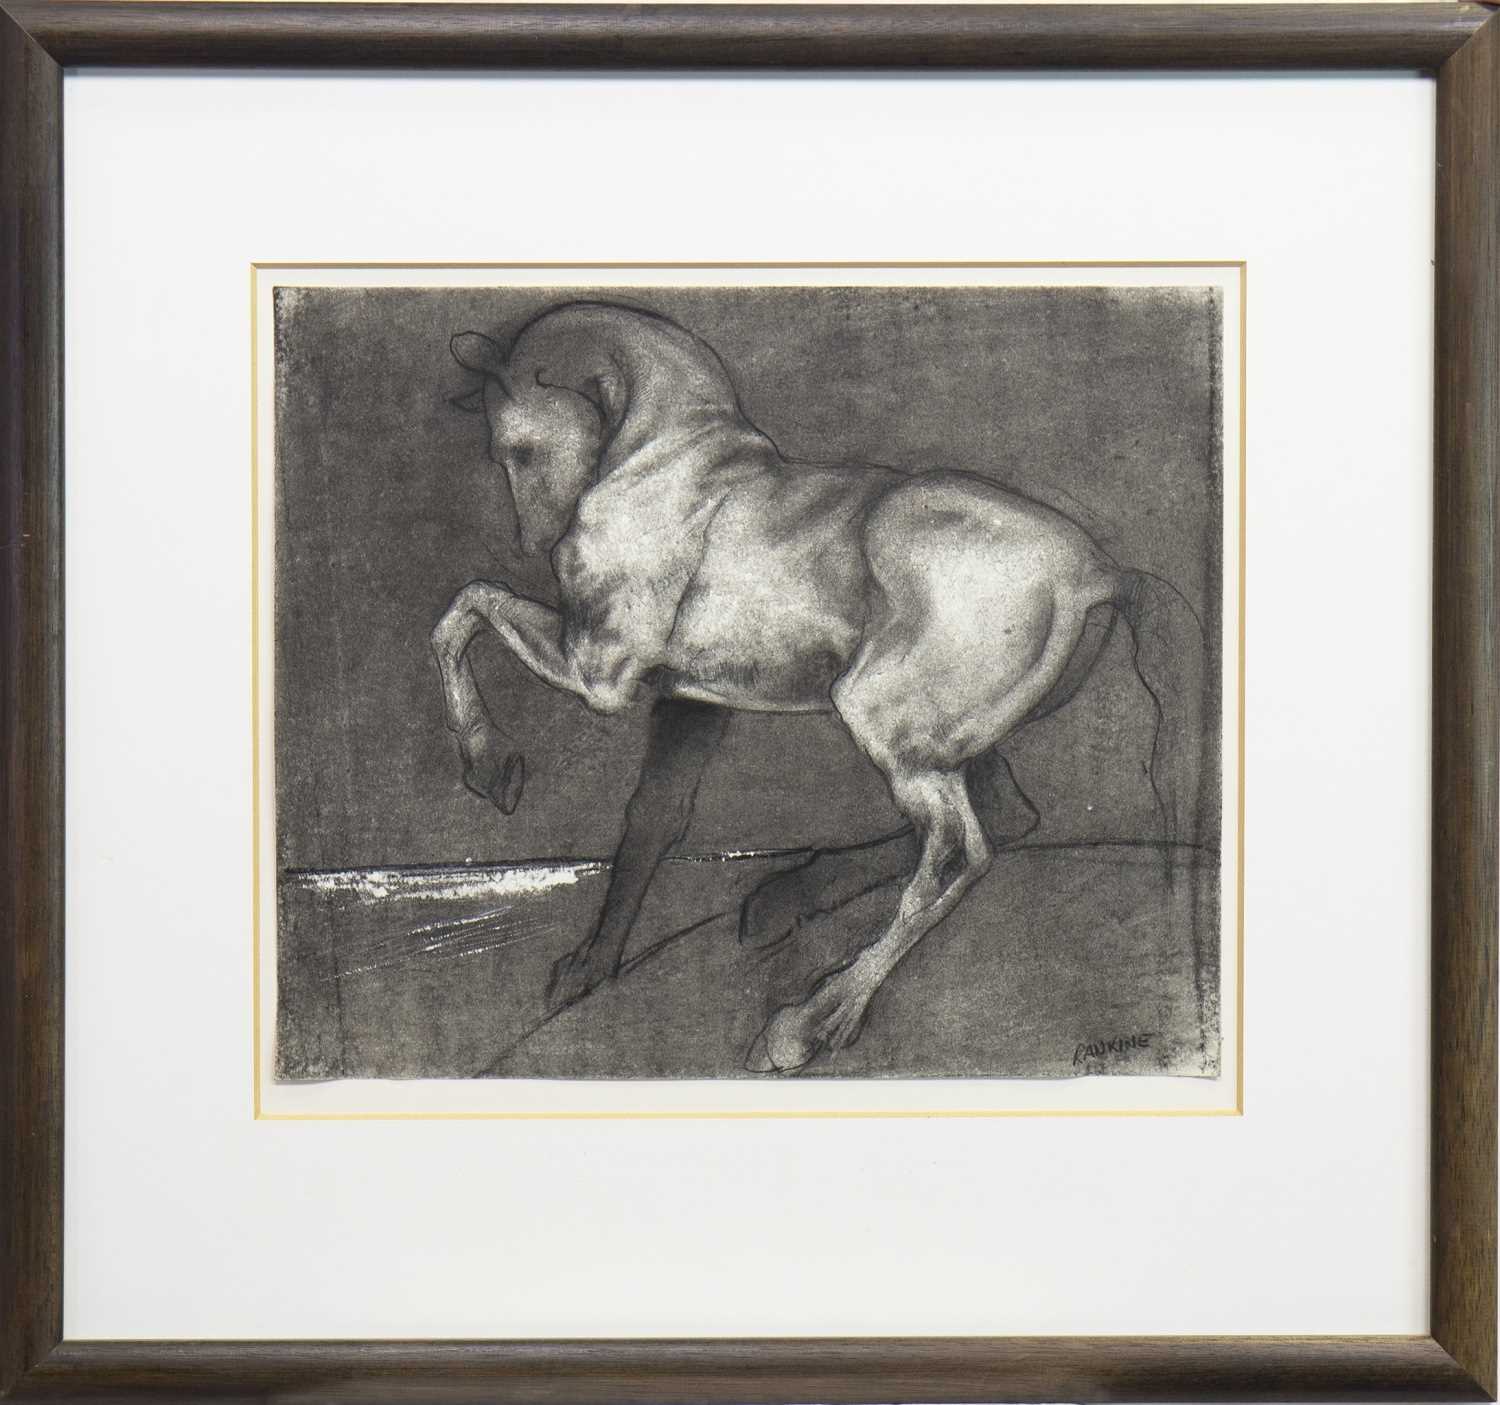 Lot 642 - REARING HORSE, A CHARCOAL SKETCH BY GREGORY RANKINE